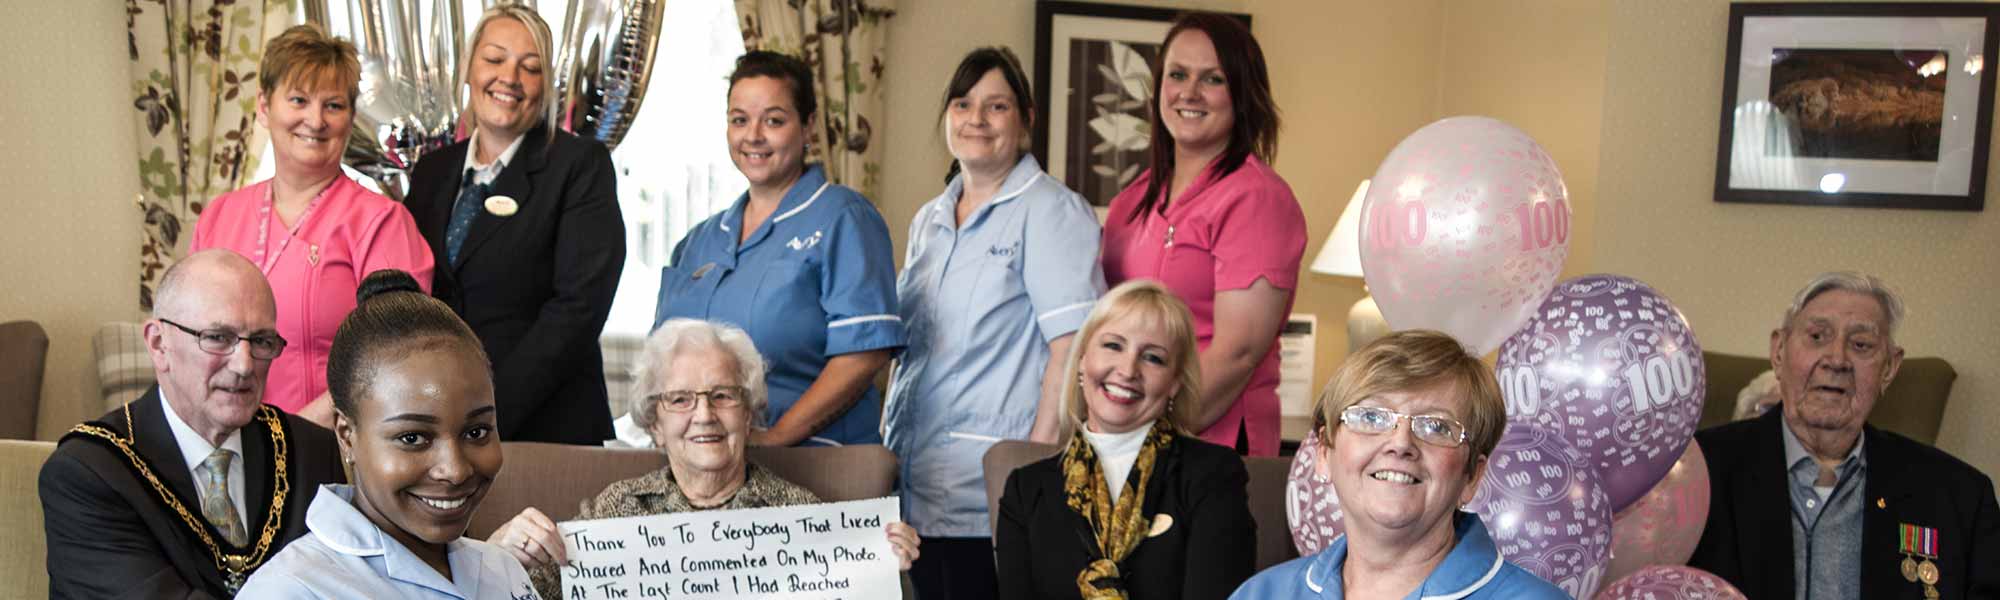 social media at acer Court care home